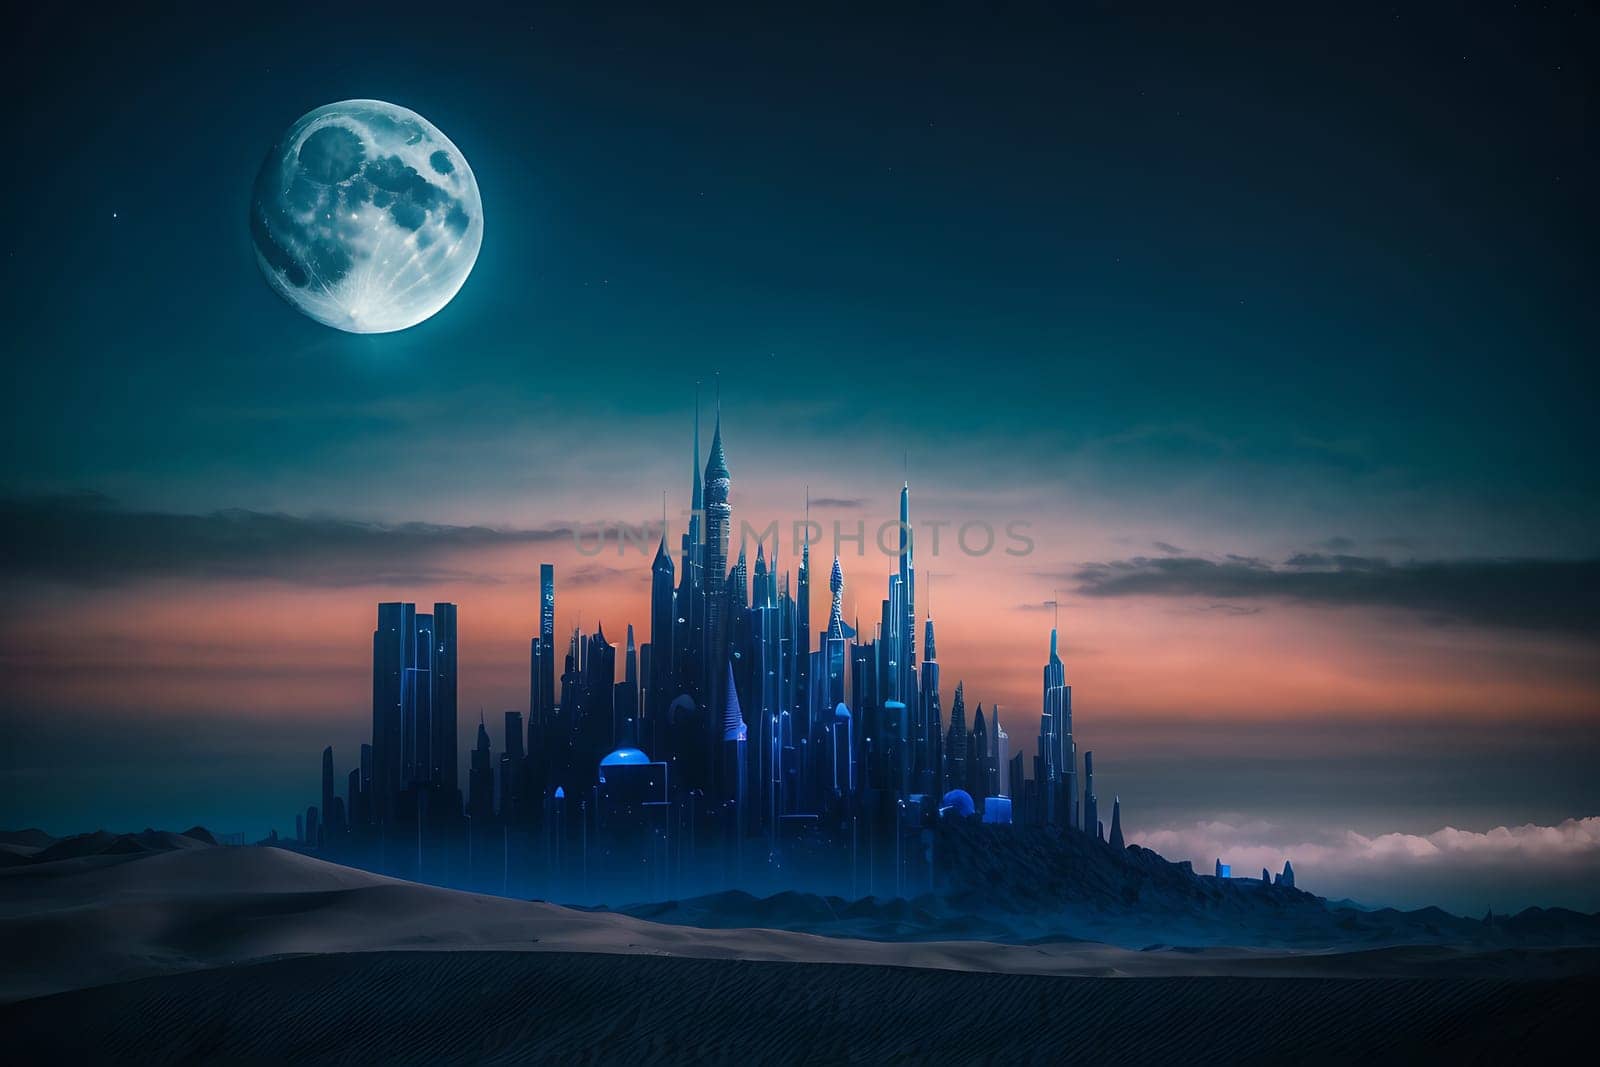 An enchanting castle stands against a backdrop of a luminous full moon in the night sky.